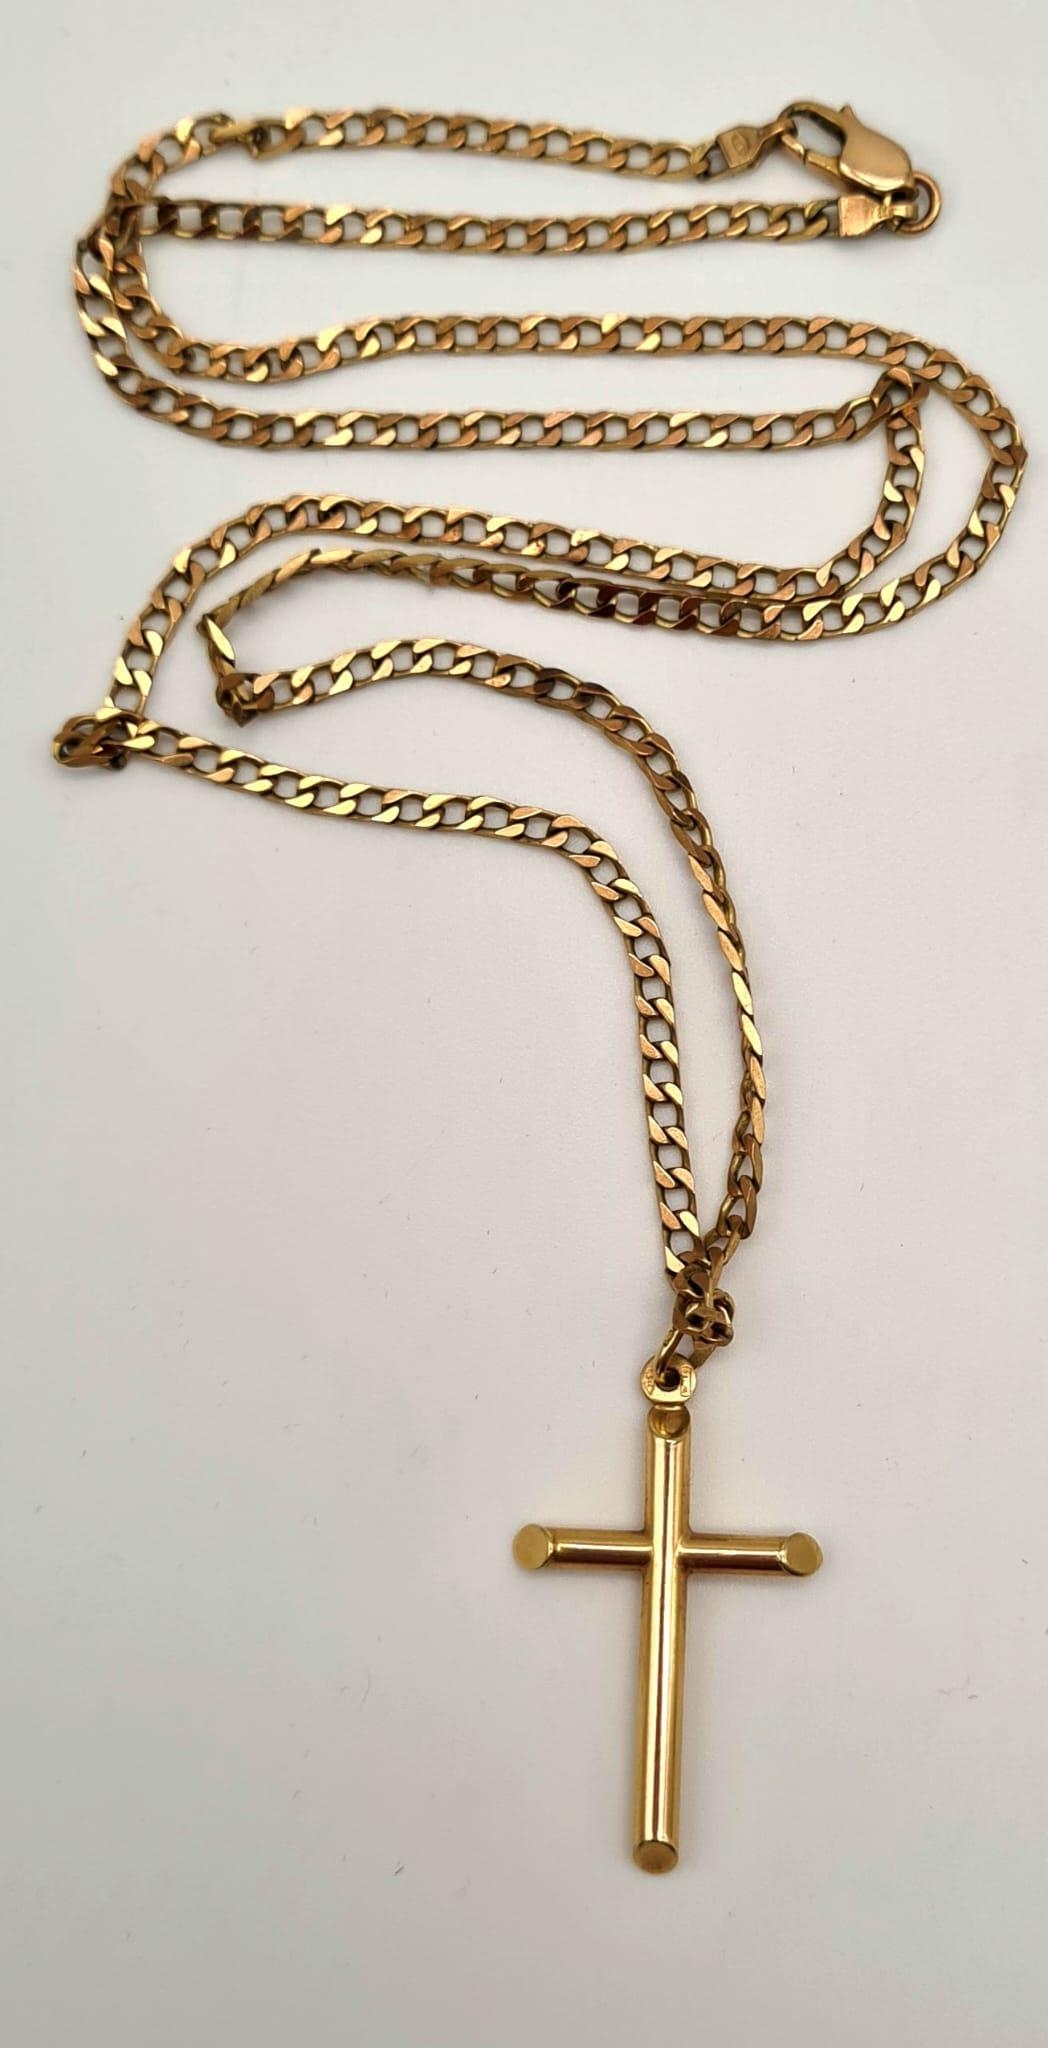 A 9K Yellow Gold Link Chain with Cross Pendant. 4 and 60cm. 11.05g total weight. Ref - 3287. - Image 3 of 6